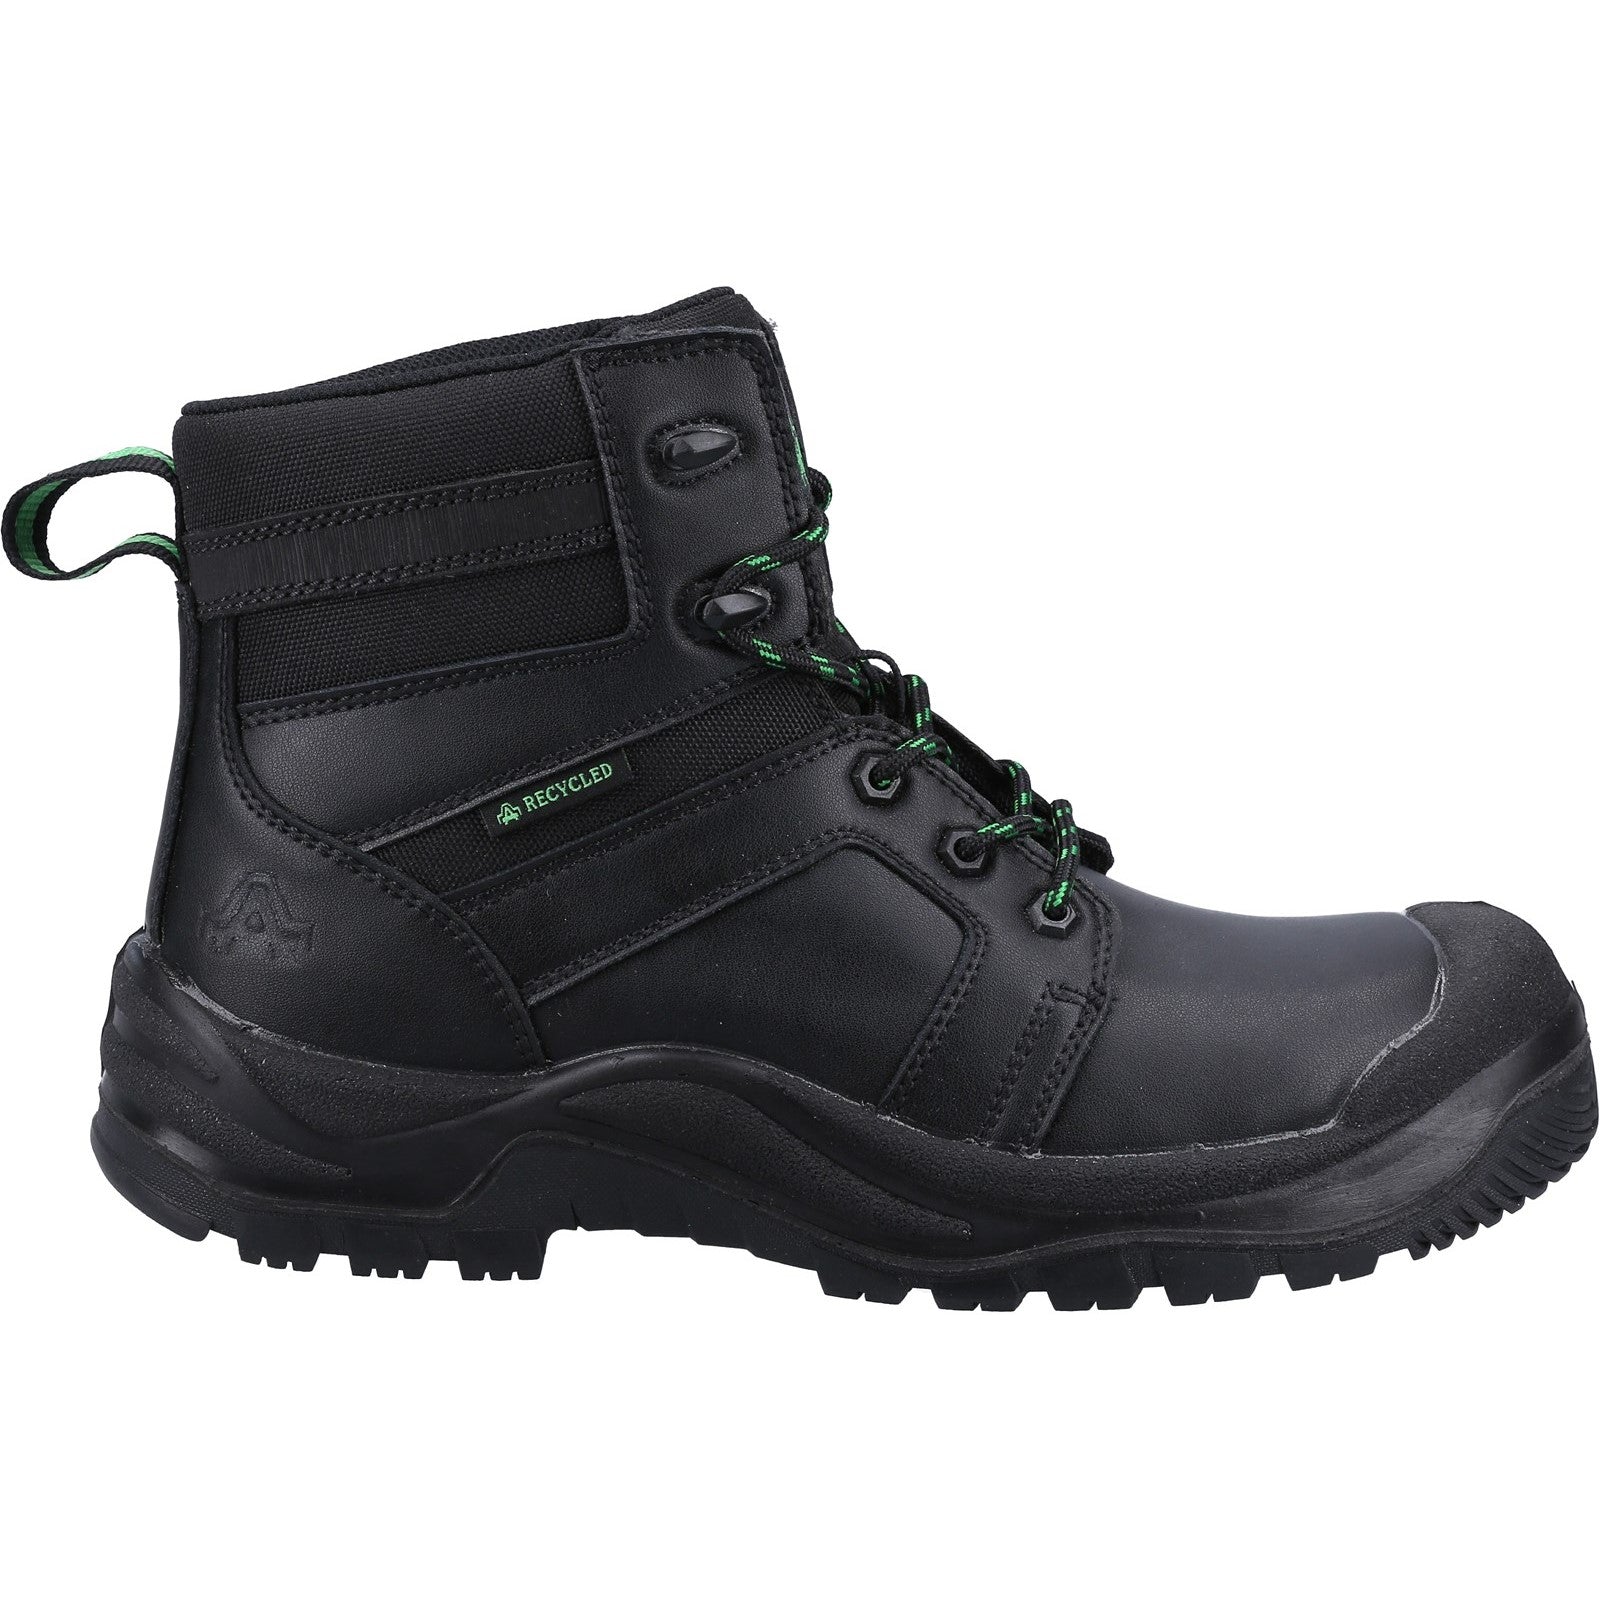 Amblers 502 Safety Boots